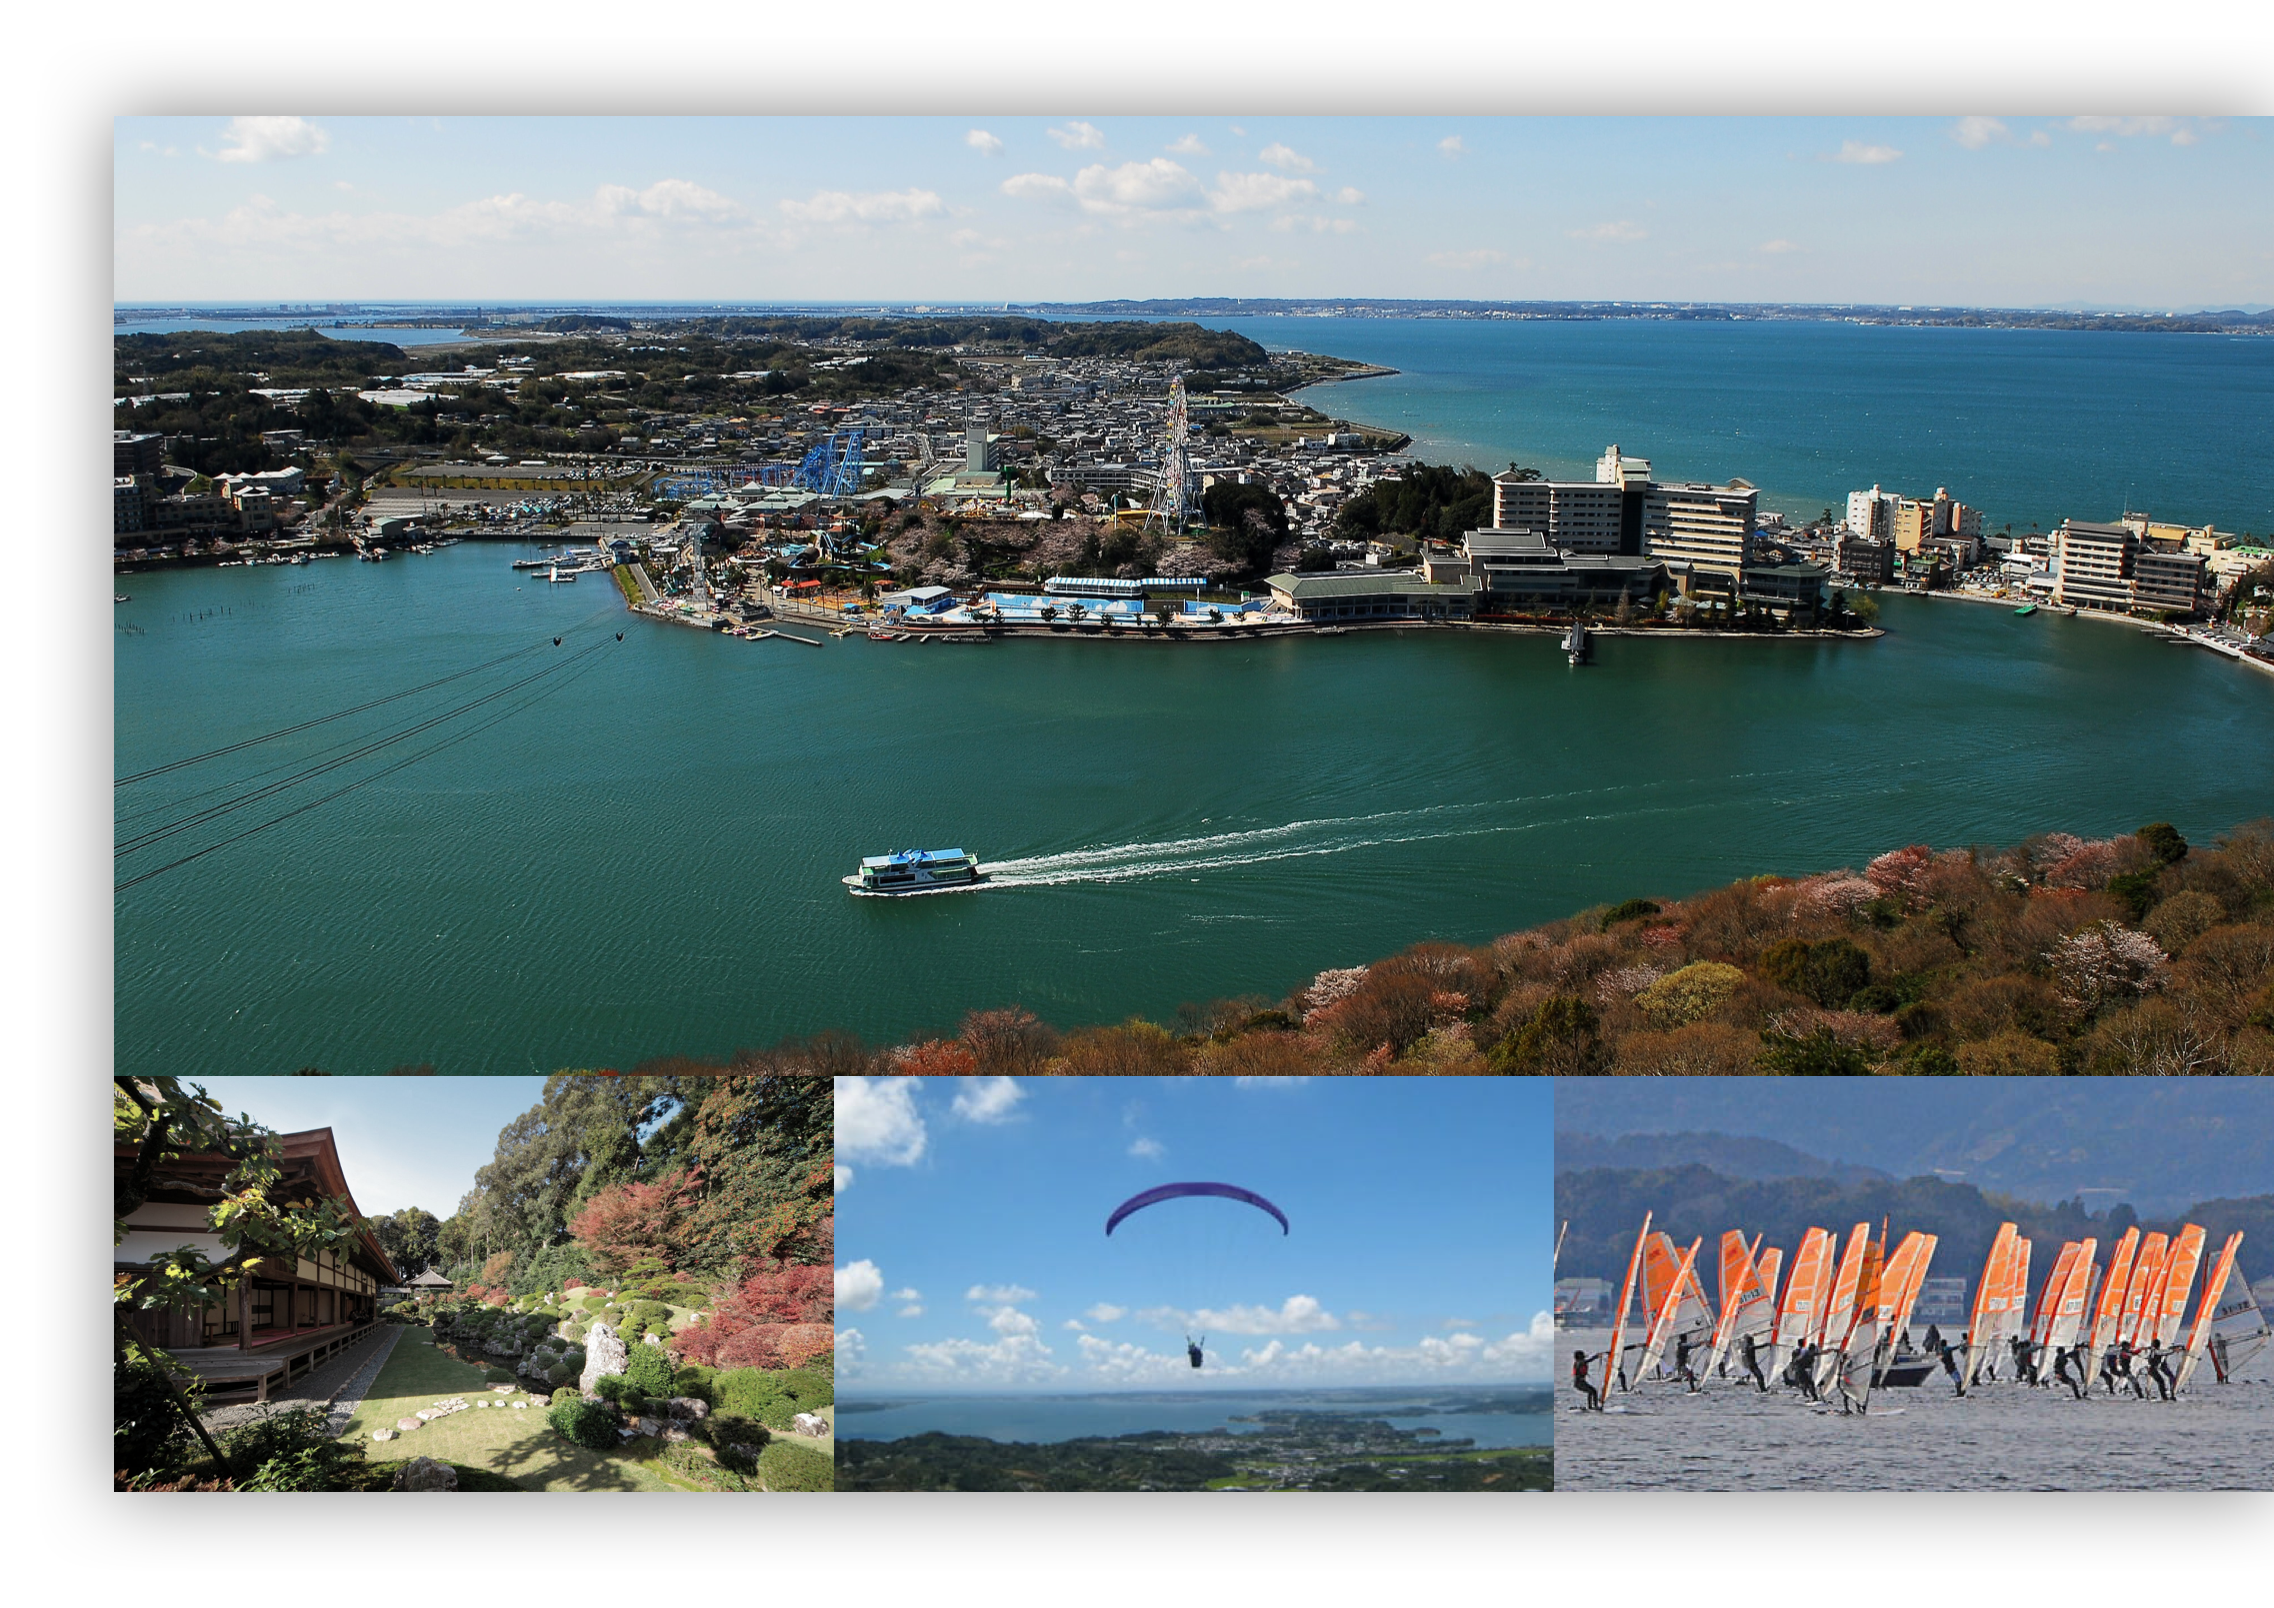 A four part image. A large photo depicts Lake Hamana as seen from a height. A passenger boat leaves a wake in the water, and multi-story buildings can be seen on the strip of land dividing the lake from the sea. The bay can be seen beyond the buildings. The three photos on the bottom depicts 1) a temple to the left, looking out on a Japanese garden with some autumn coloring, 2) a hang glider seen from behind, gliding against a blue sky over Hamamatsu, and 3) a dense group of windersurfers in Hamamatsu.